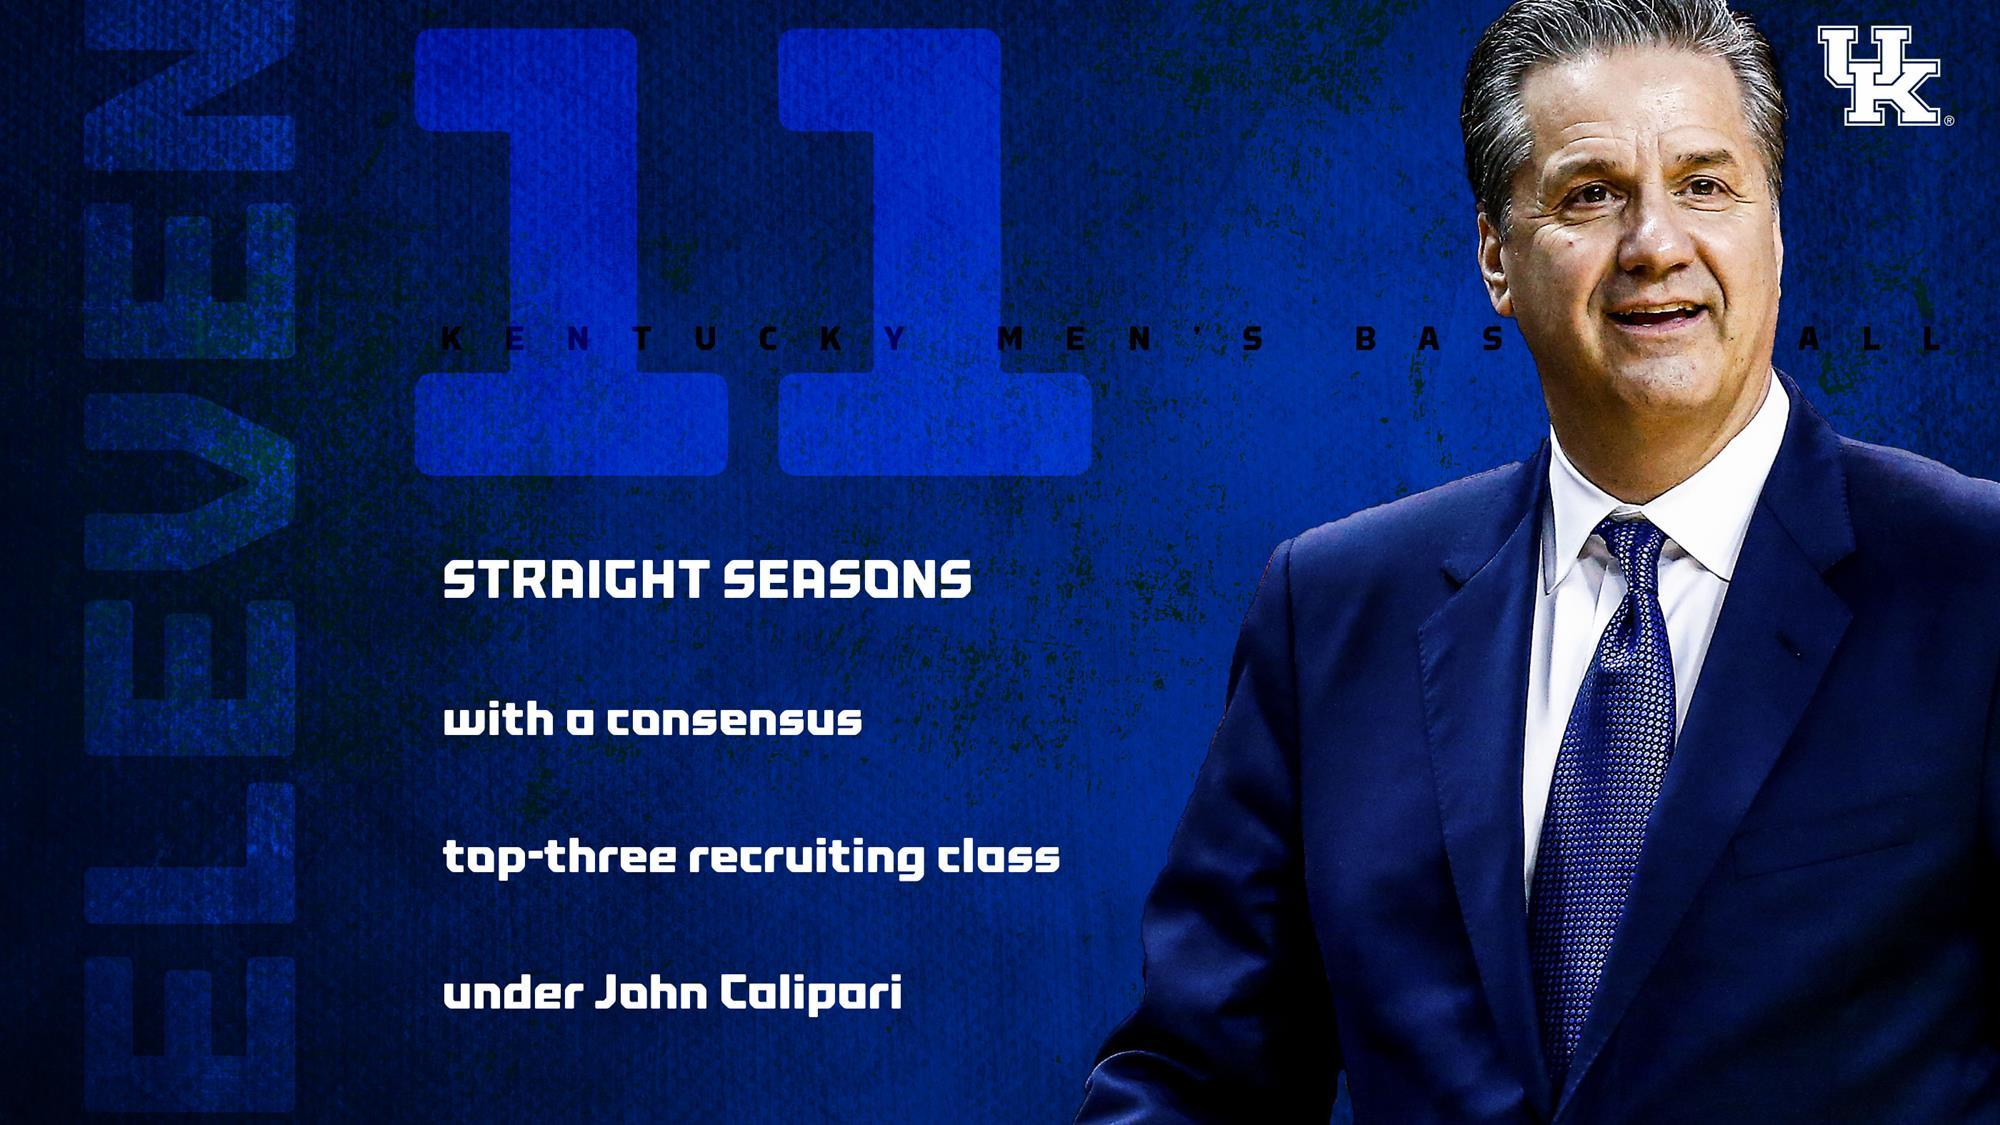 UK Men’s Basketball Lands 11th Straight Top-Three Signing Class